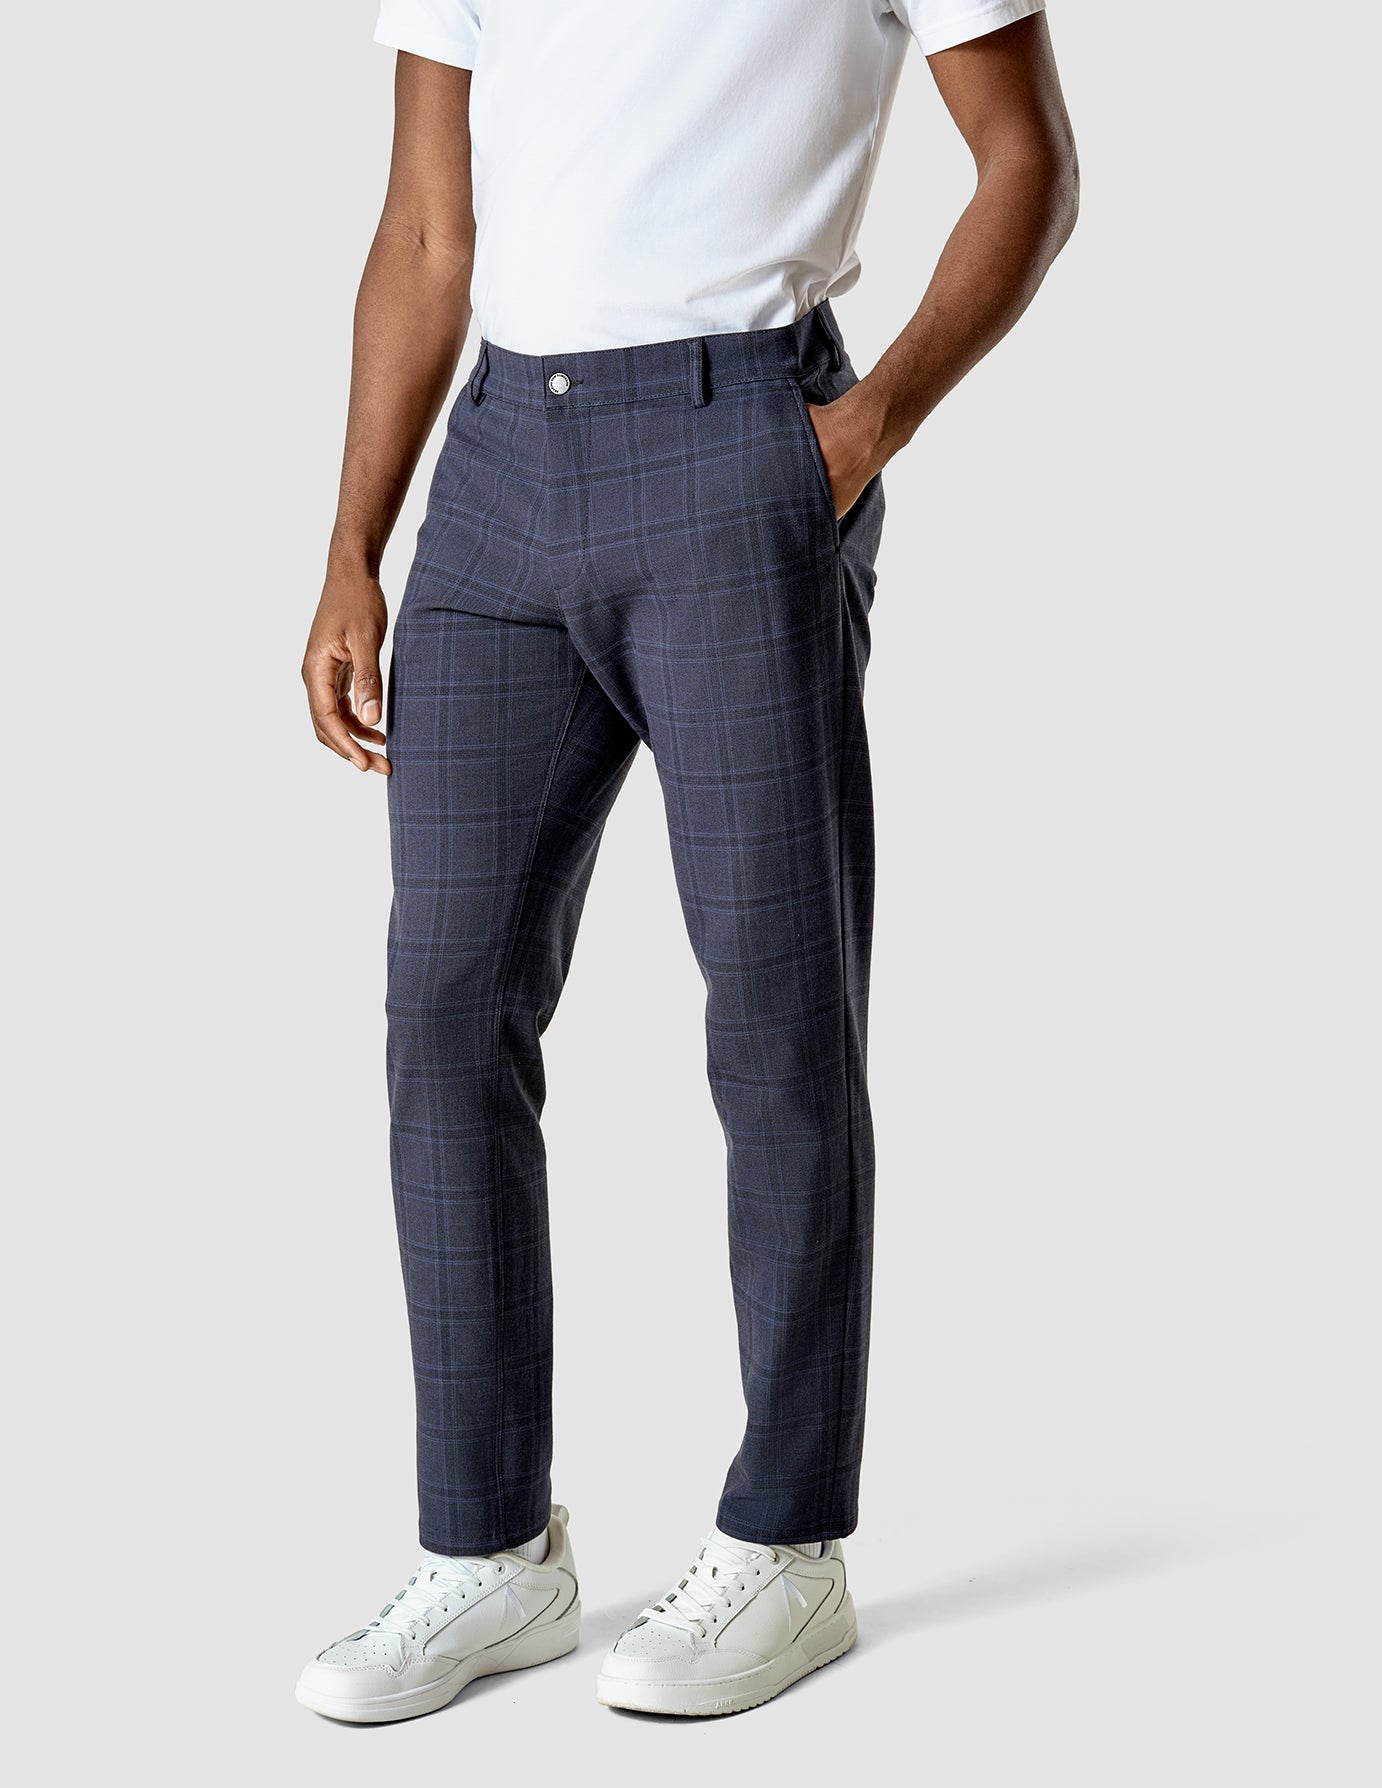 Blue Check Dress Pants Outfits For Men (38 ideas & outfits) | Lookastic